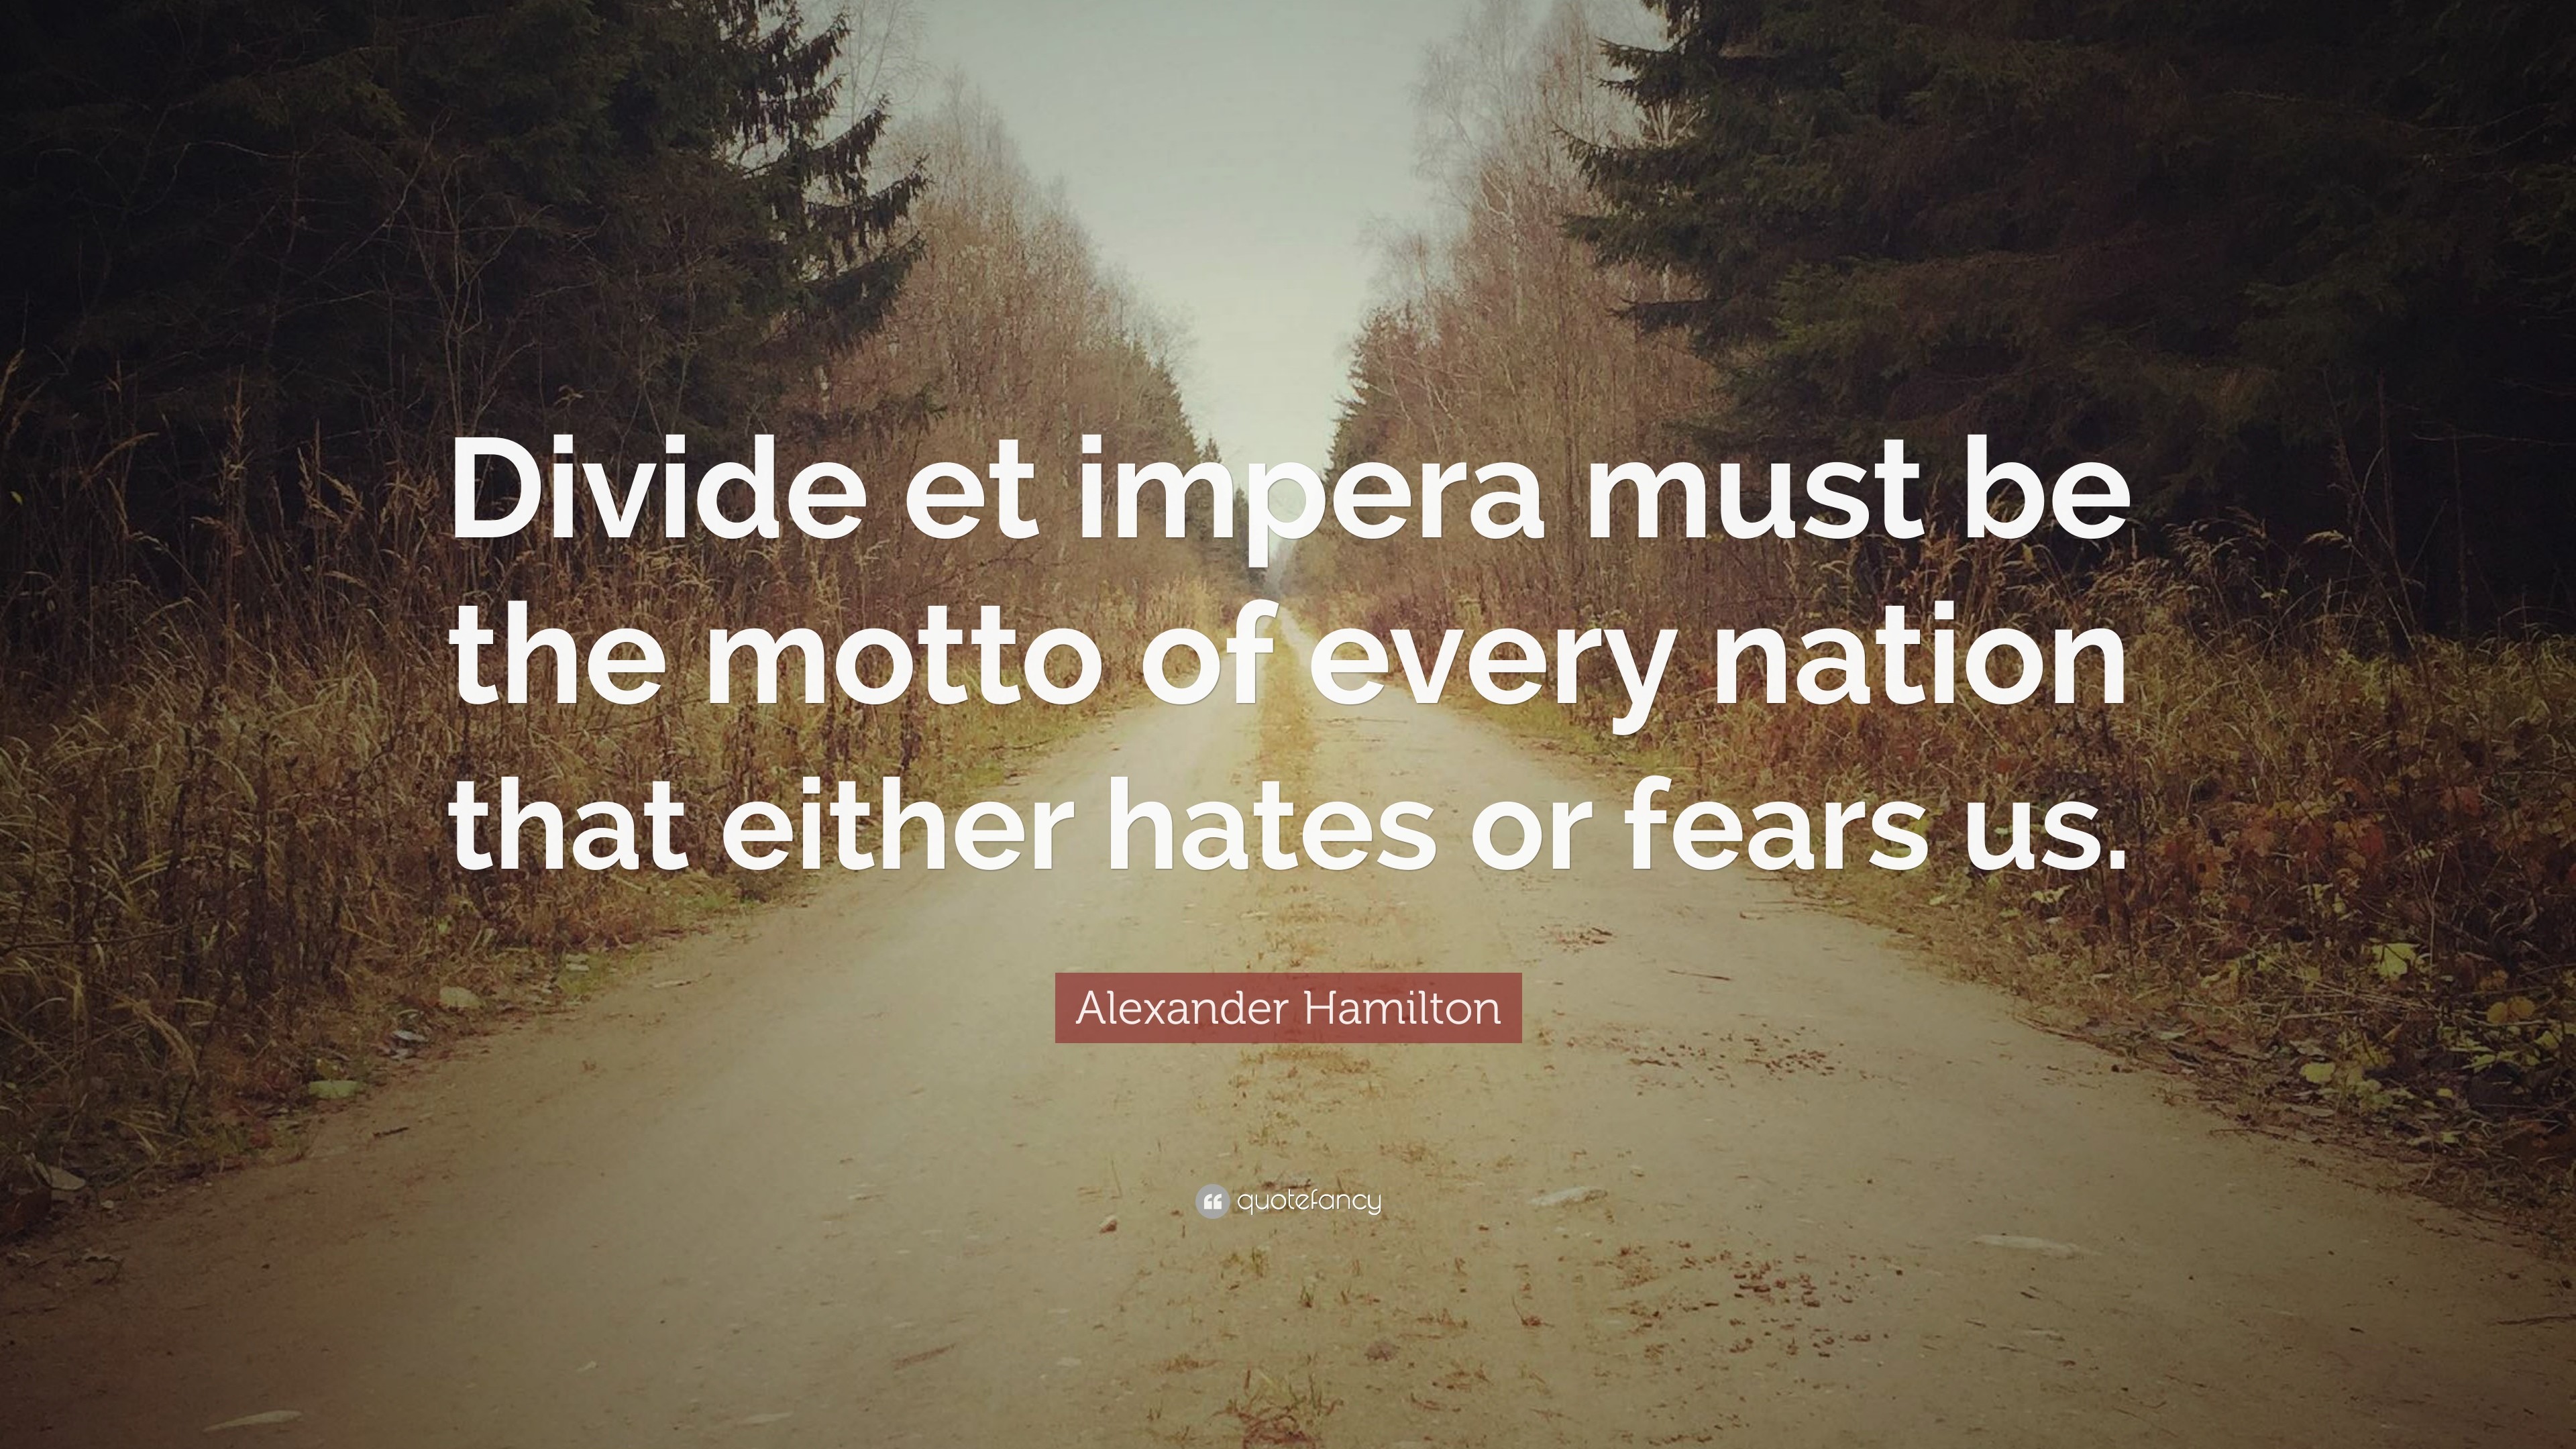 3840x2160 Alexander Hamilton Quote: “Divide et impera must be the motto of every  nation that